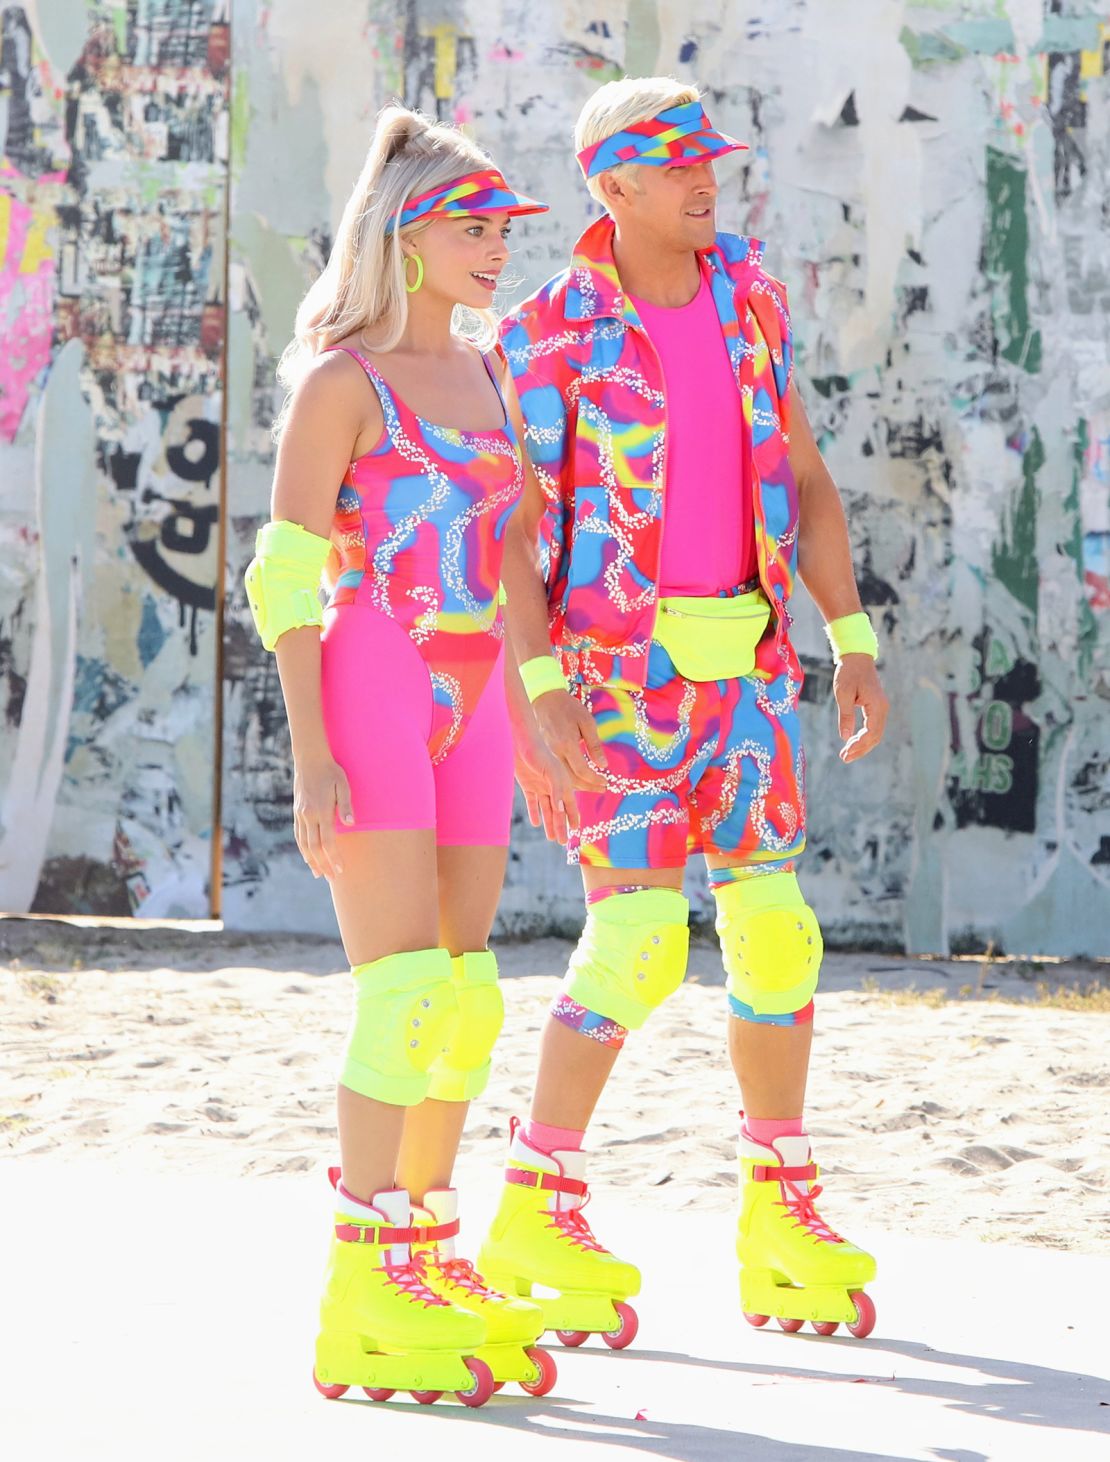 Last summer, on-set images of Margot Robbie and Ryan Gosling rollerblading in Venice, Los Angeles, went viral.